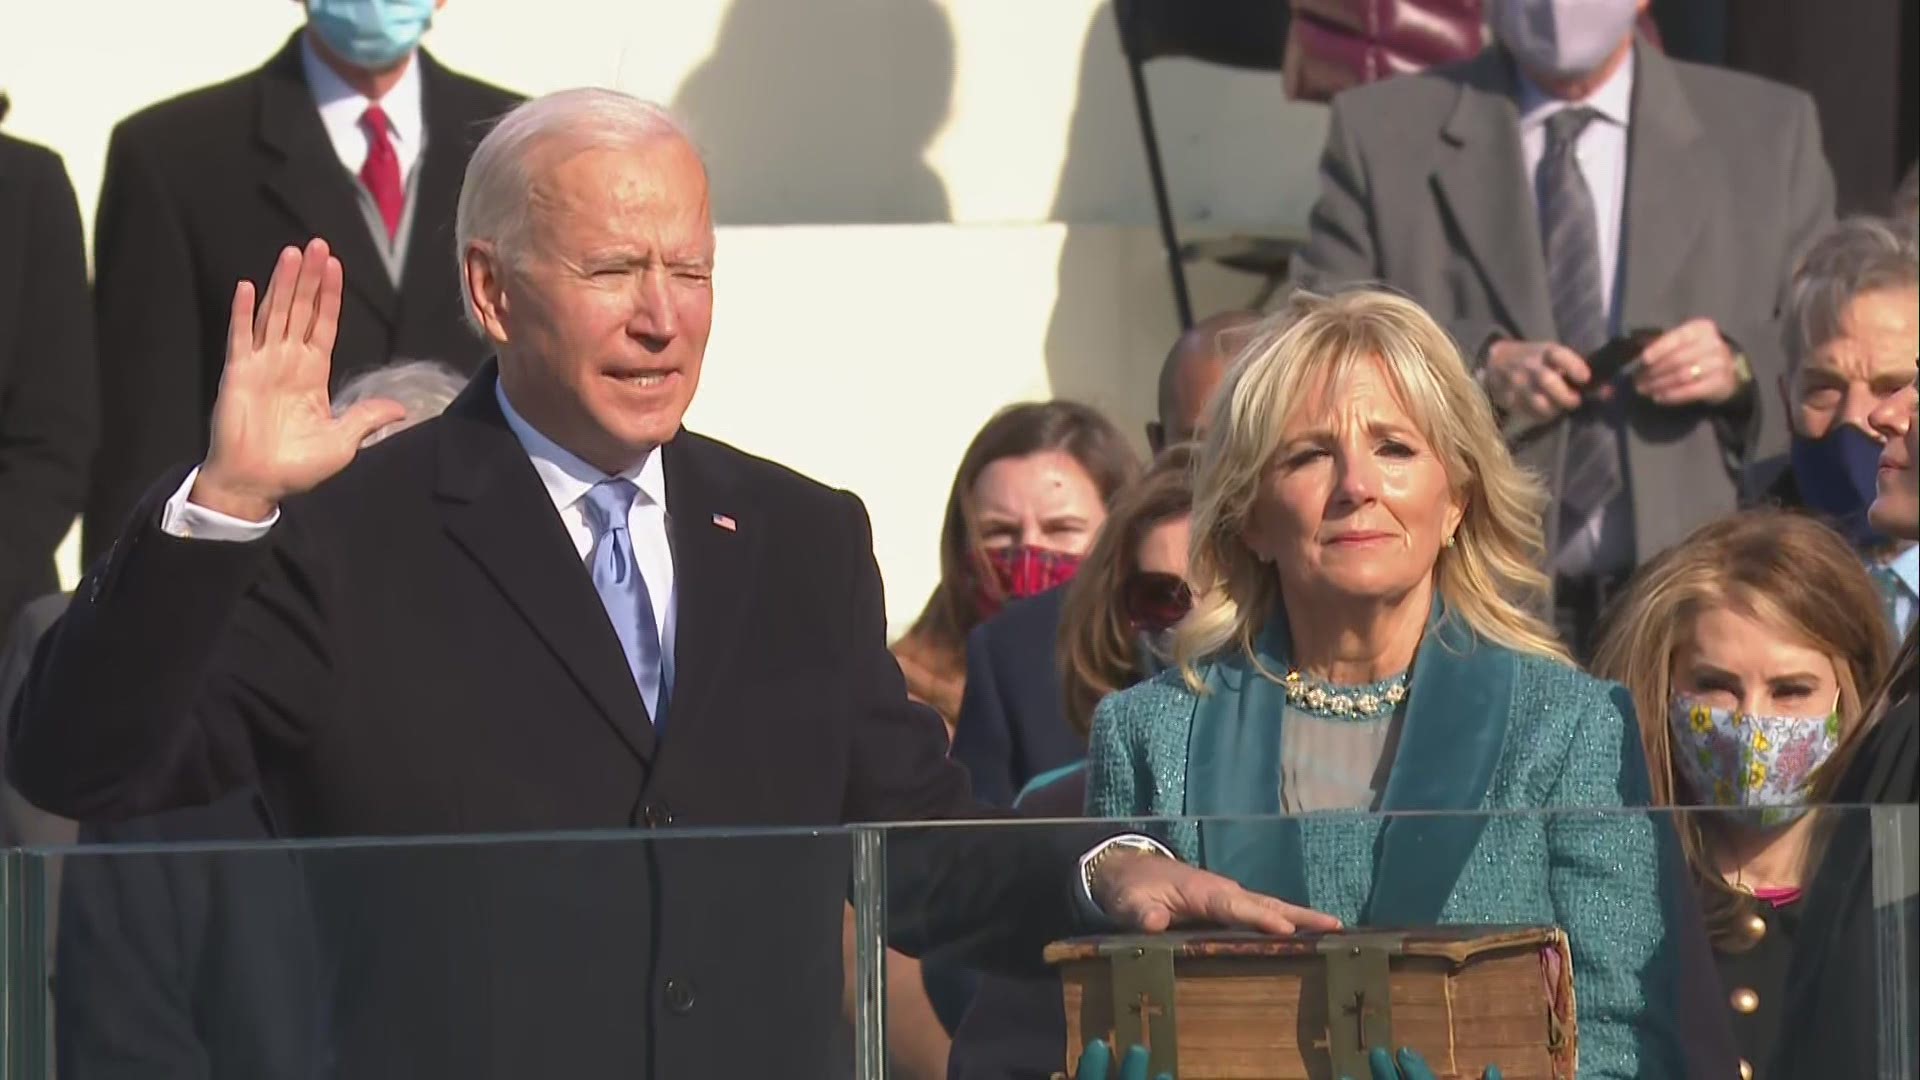 Joe Biden is officially sworn in as president of the United States.